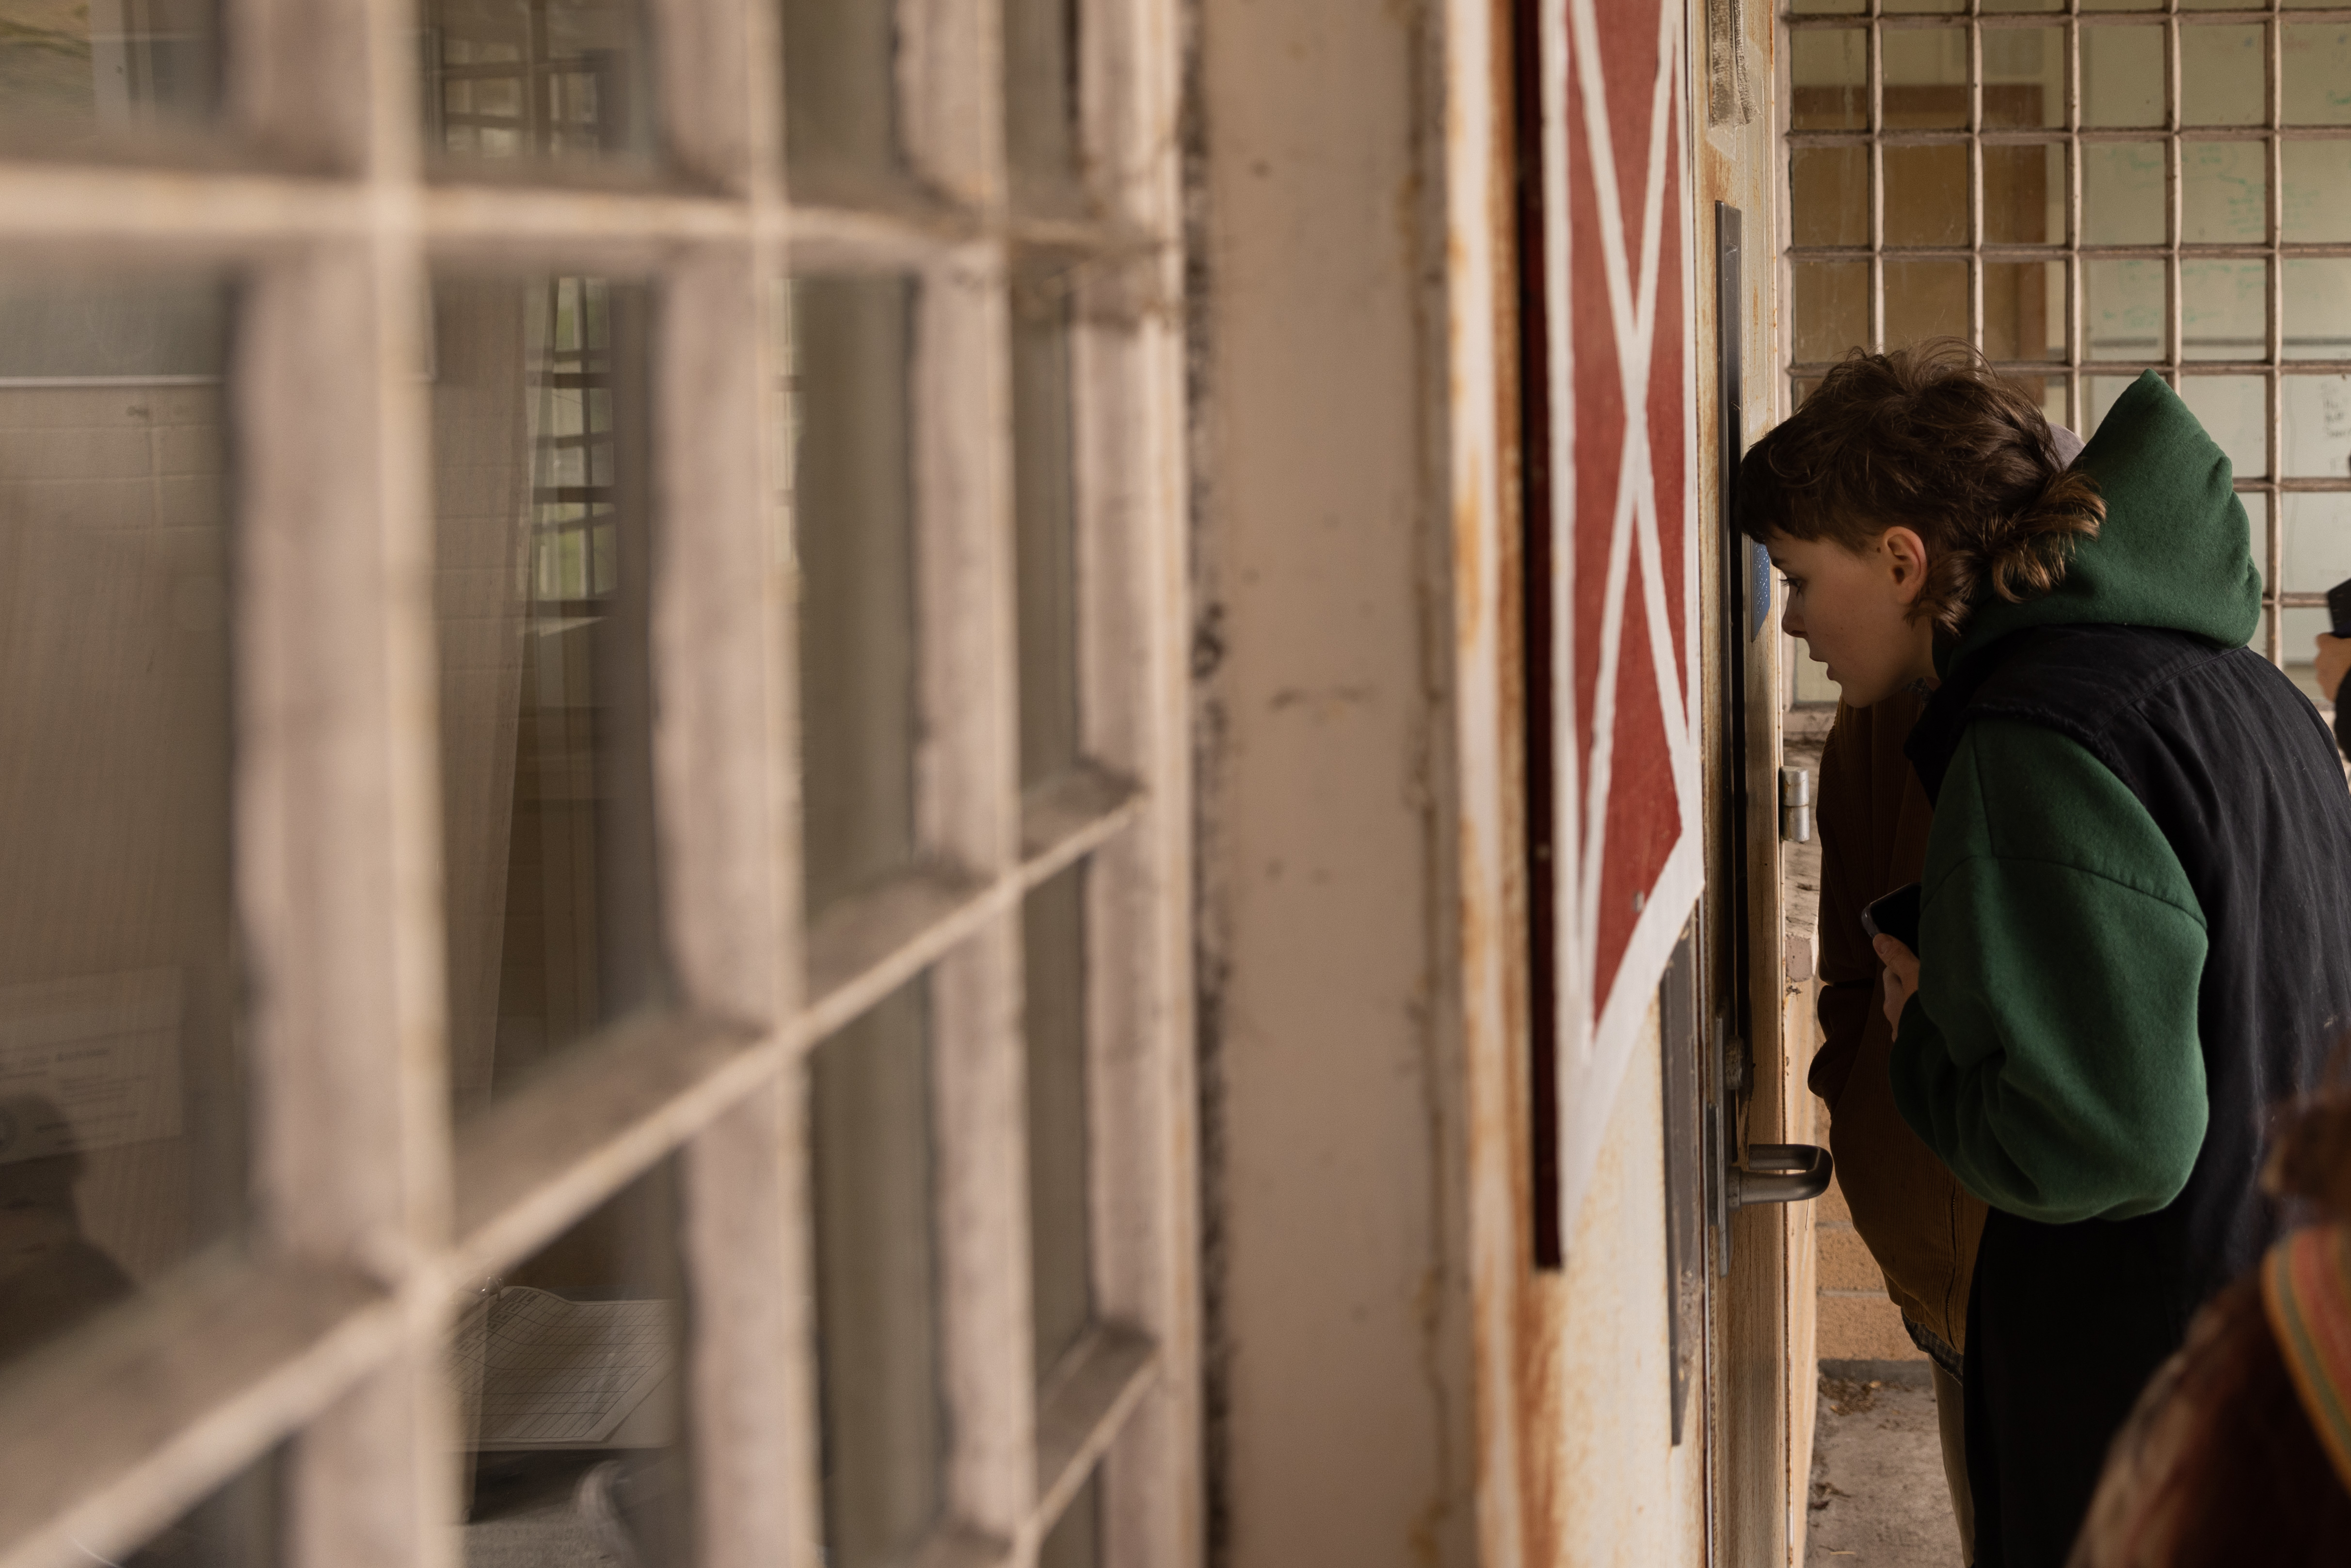 A student looked through bars at a jailhouse. 